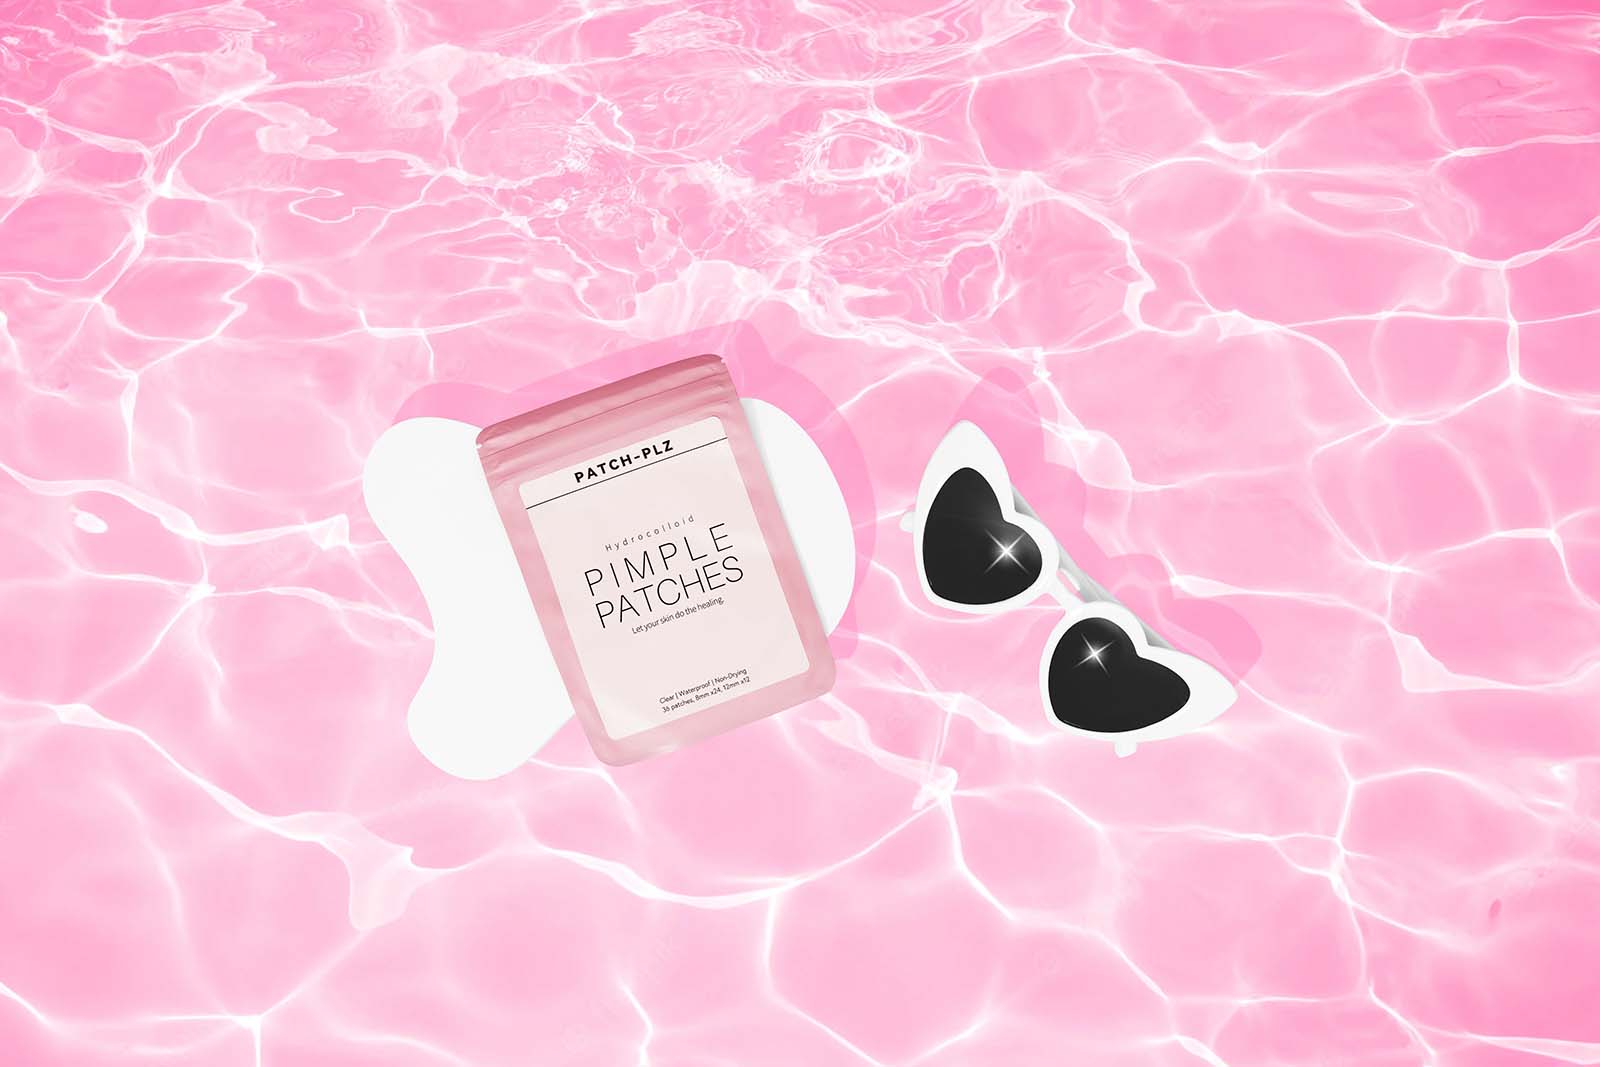 Patch Plz's pink pimple patches take center stage in dreamy product photography by Colourpop Studio